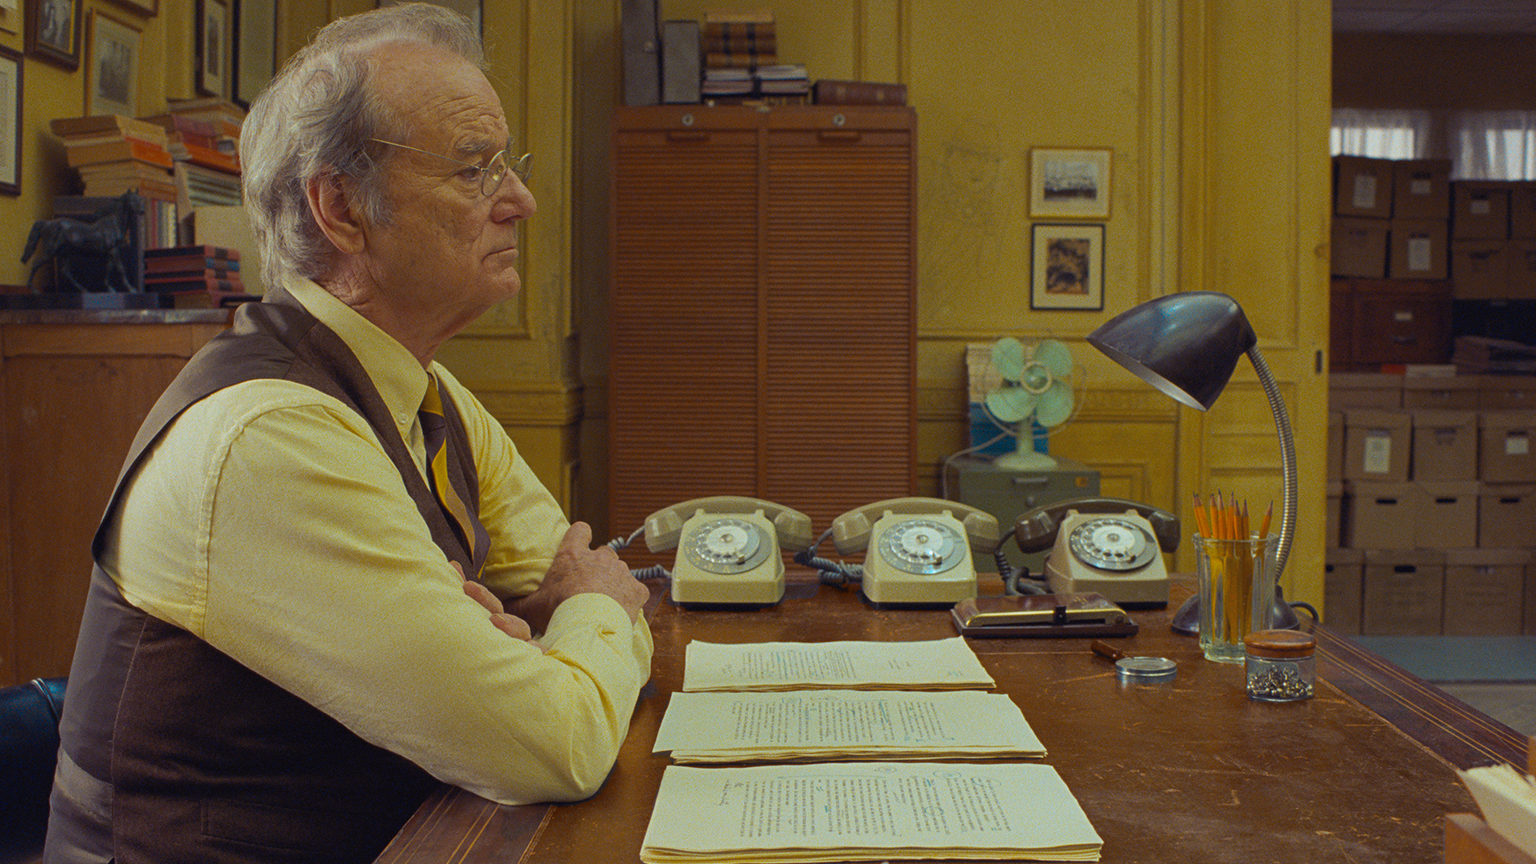 Bill Murray in the film The French Dispatch. Image: Searchlight Pictures